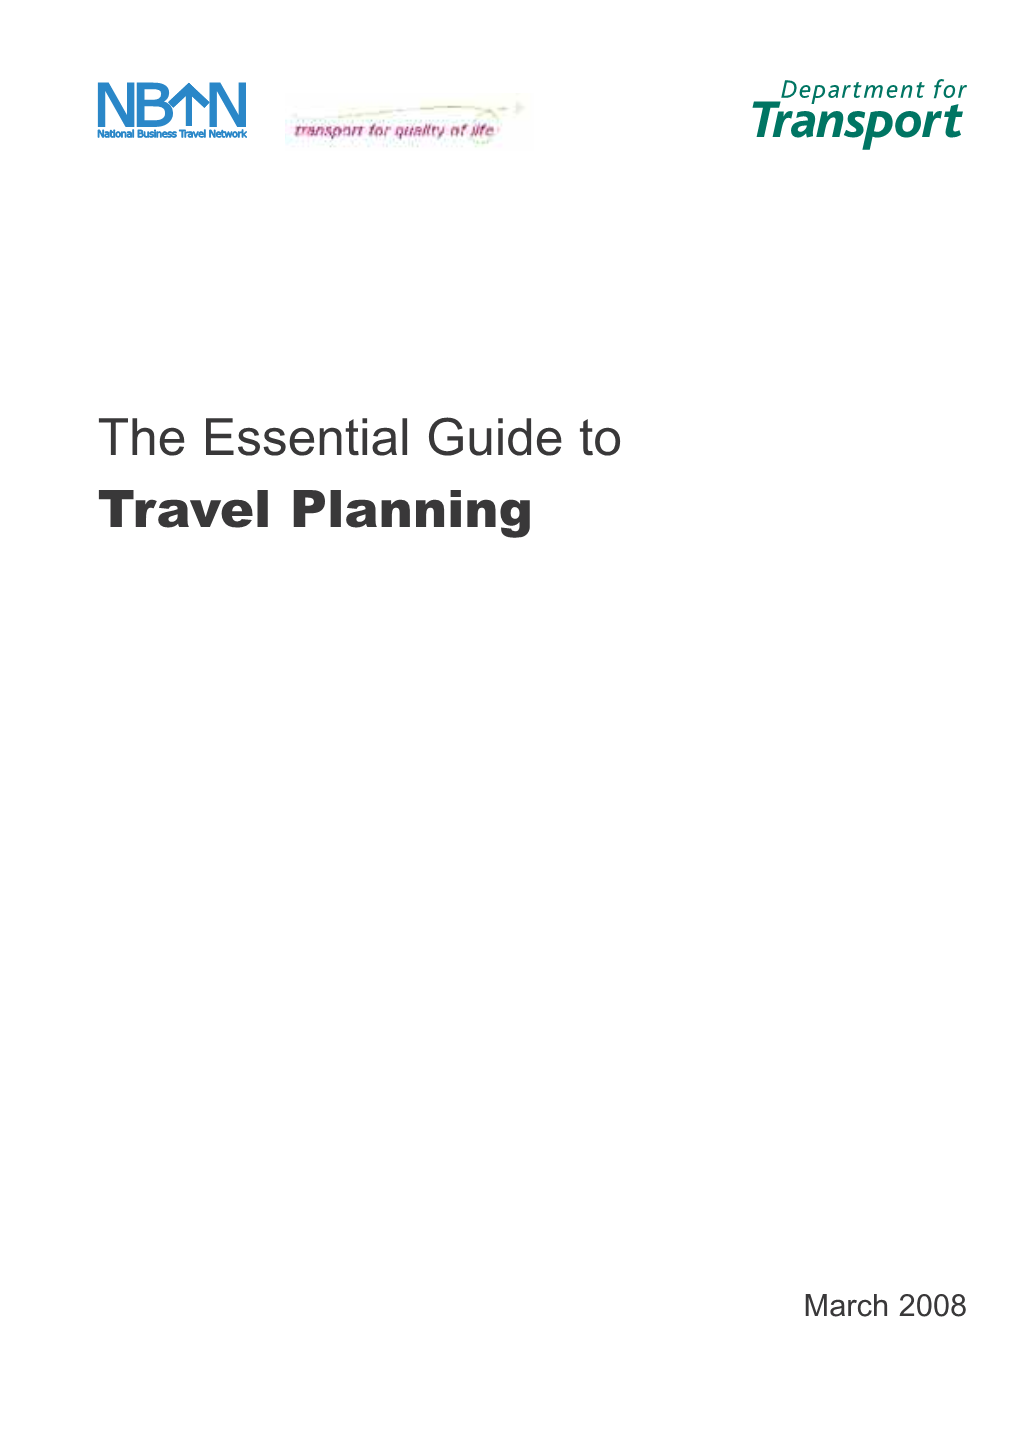 The Essential Guide to Travel Planning